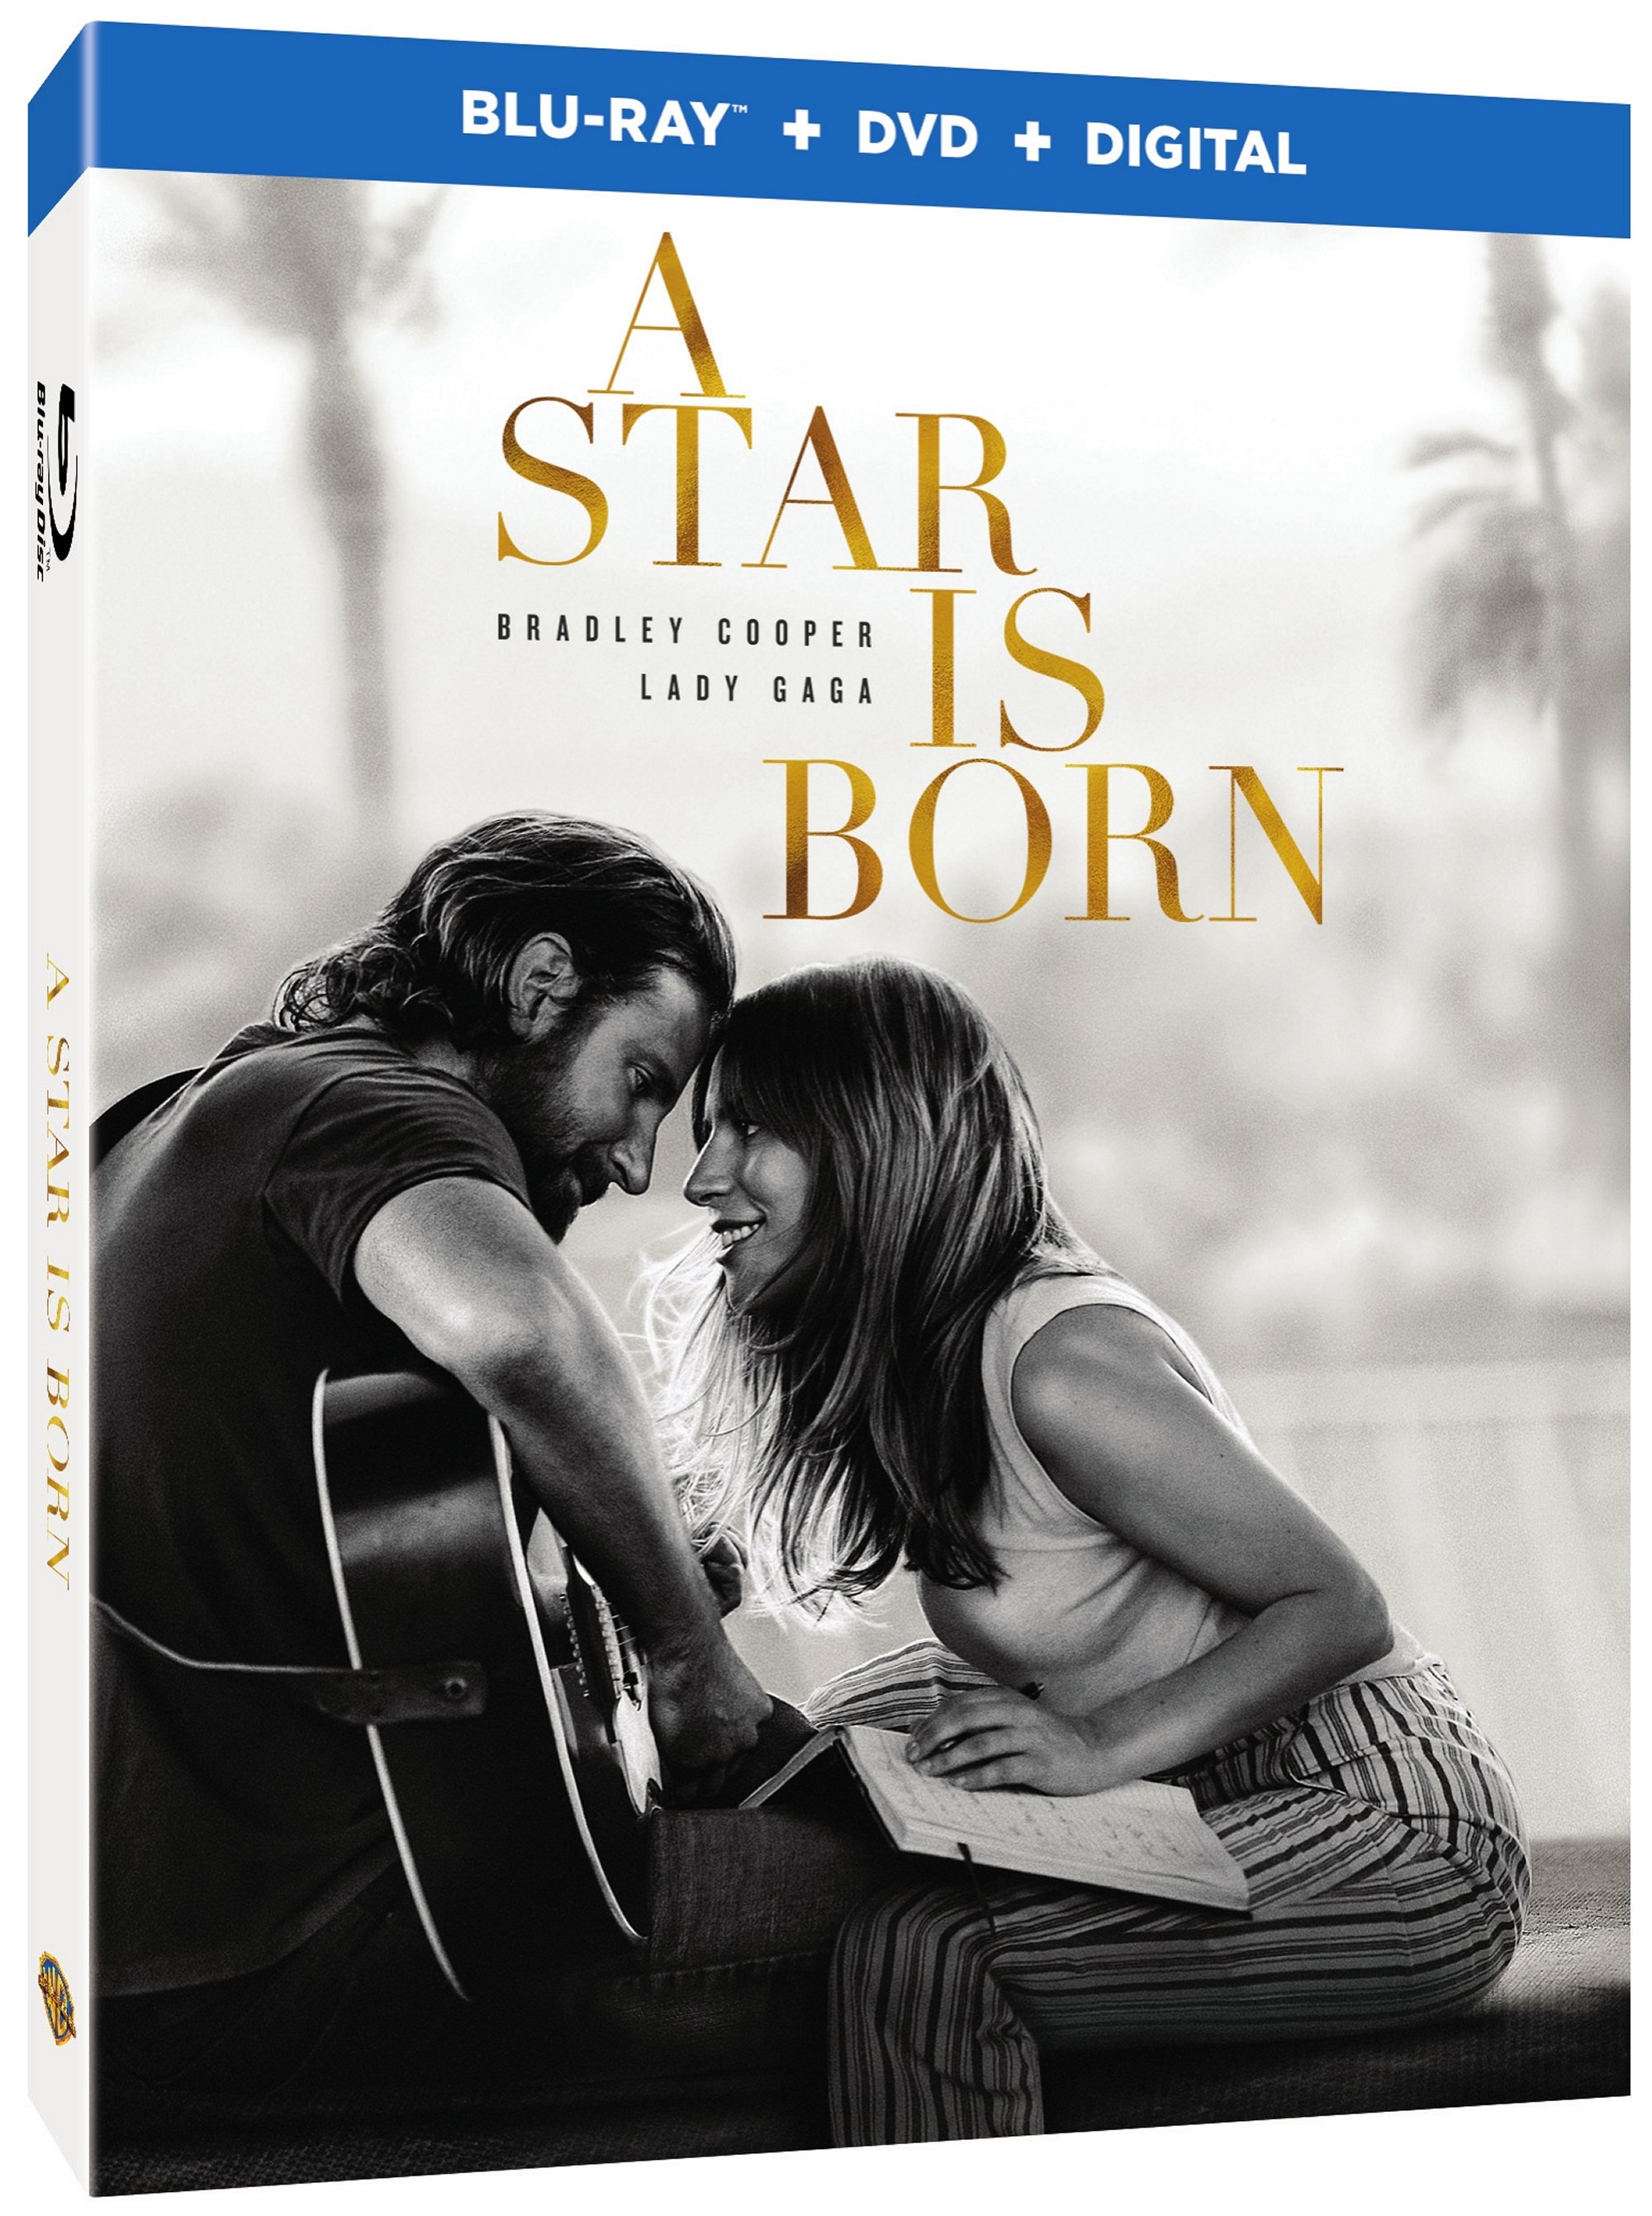 A Star Is Born Blu-Ray Combo Pack cover (Warner Bros. Home Entertainment)